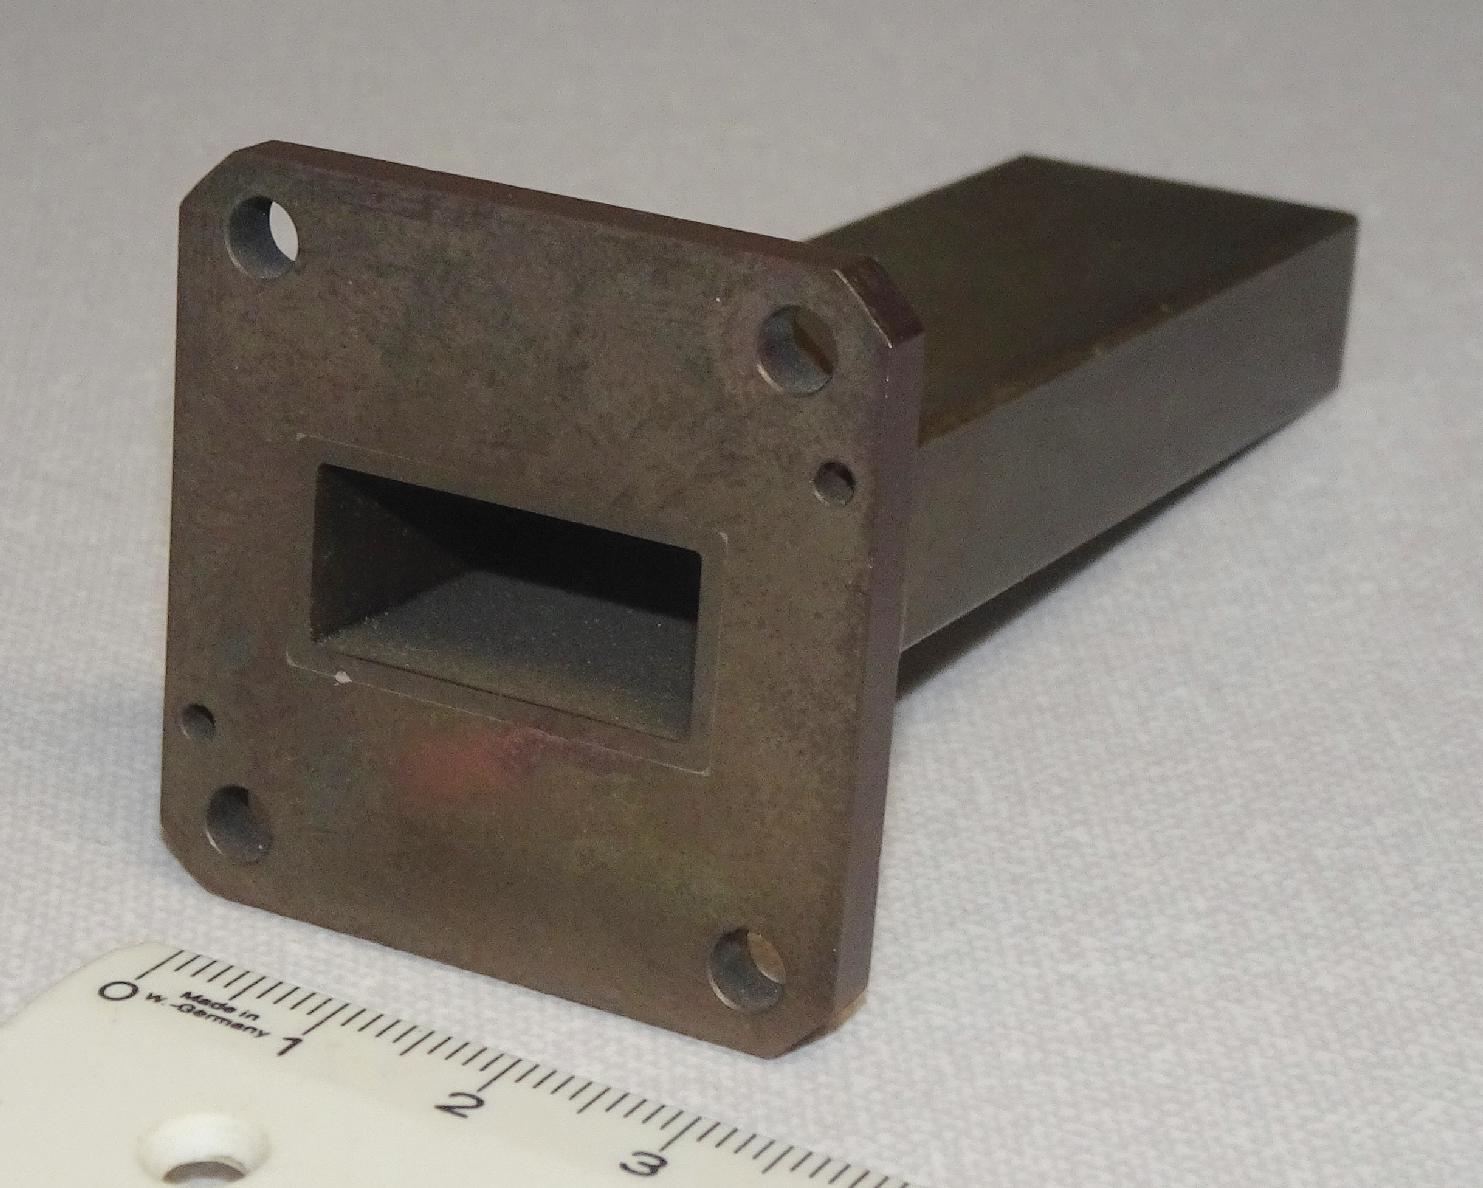 a piece of WR90 waveguide